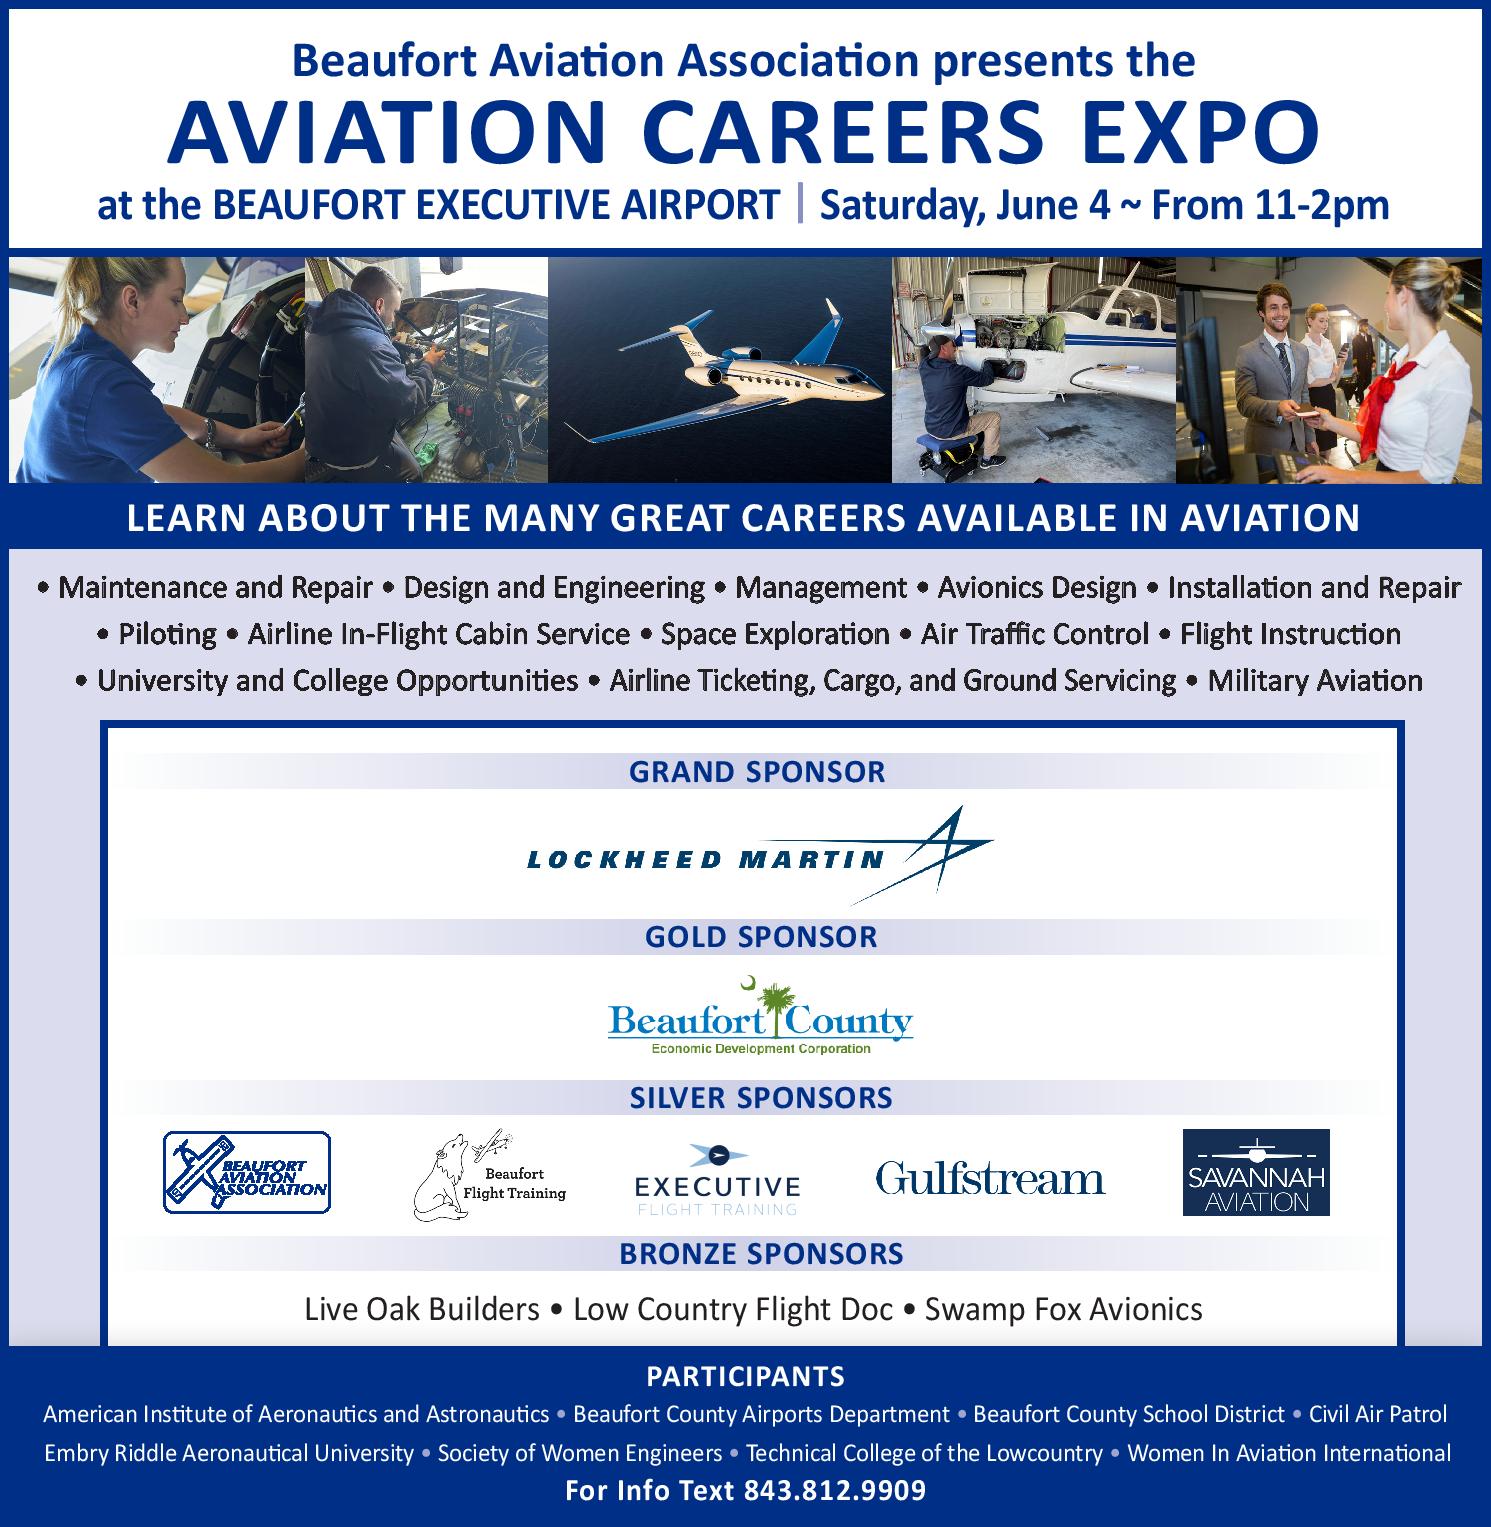 Beaufort Executive Airport Hosting Aviation Careers Expo This Saturday